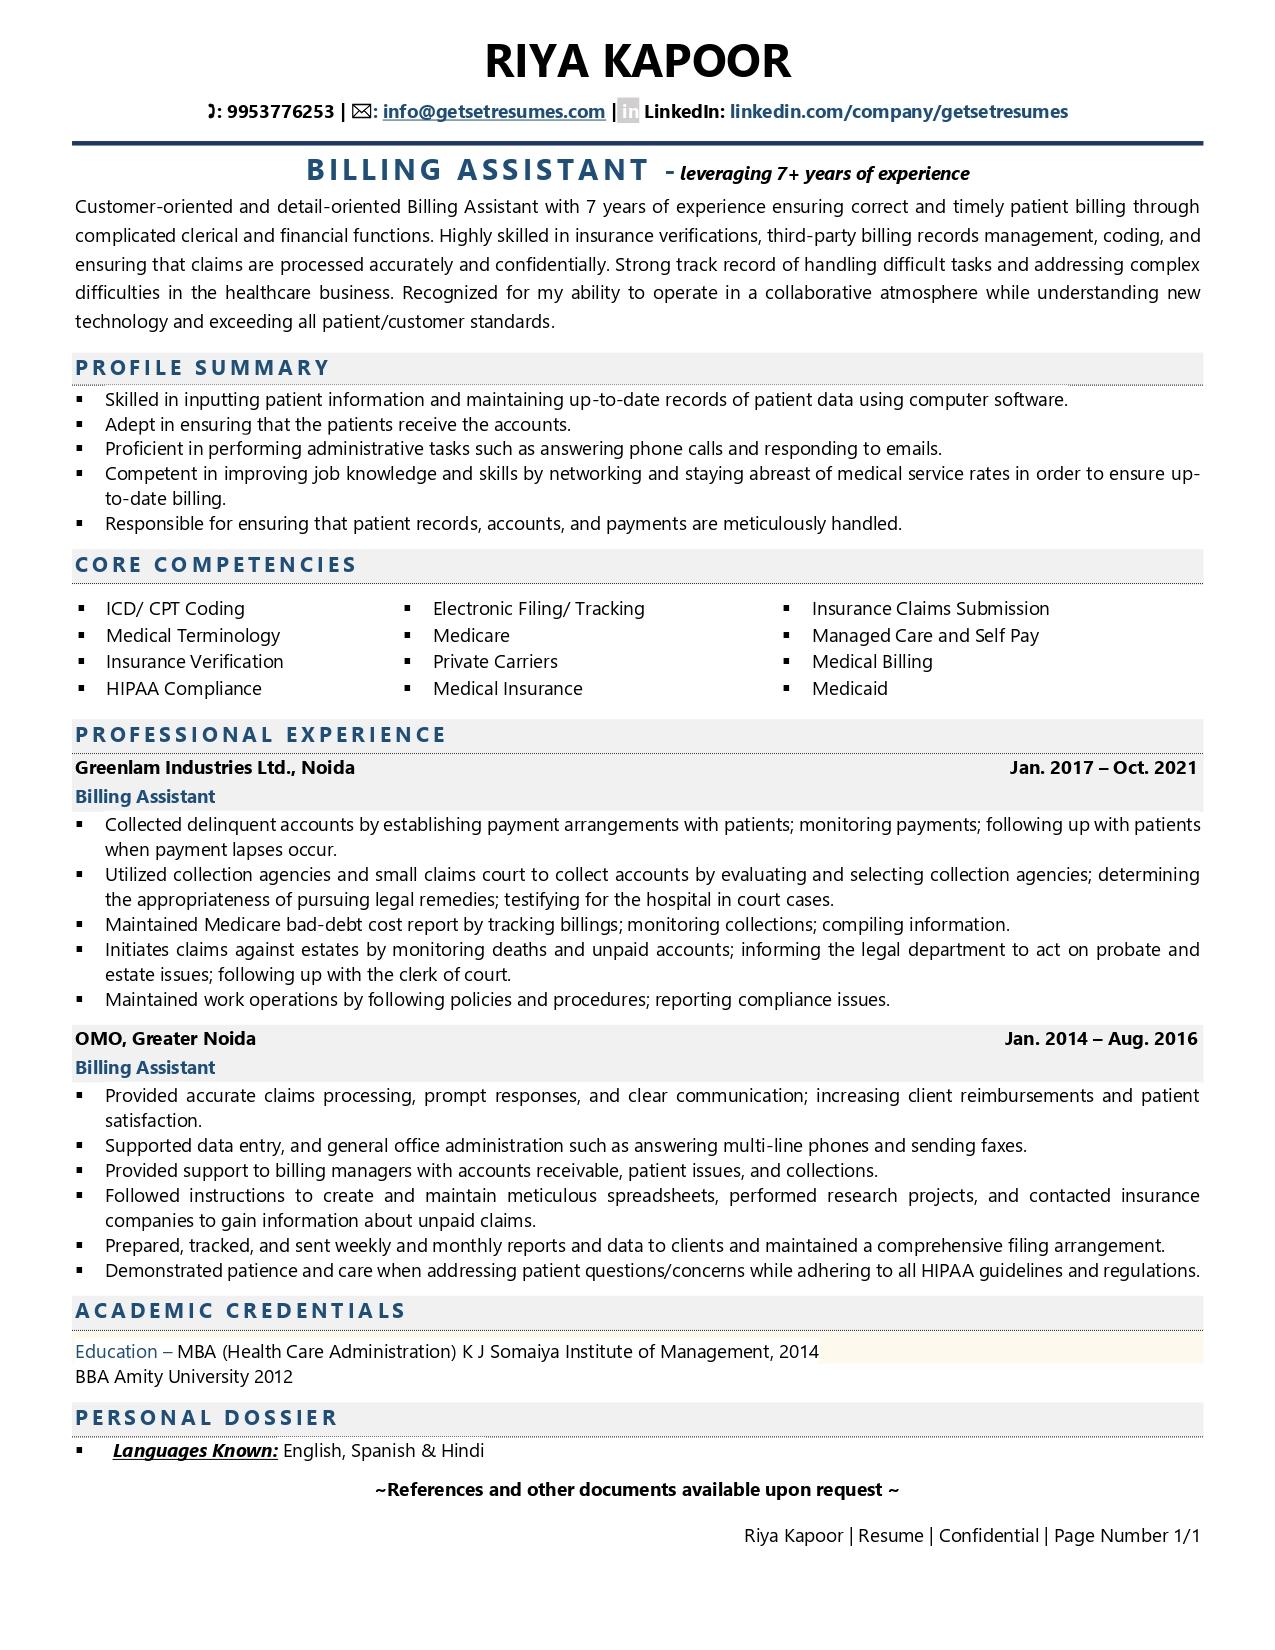 Billing Assistant - Resume Example & Template